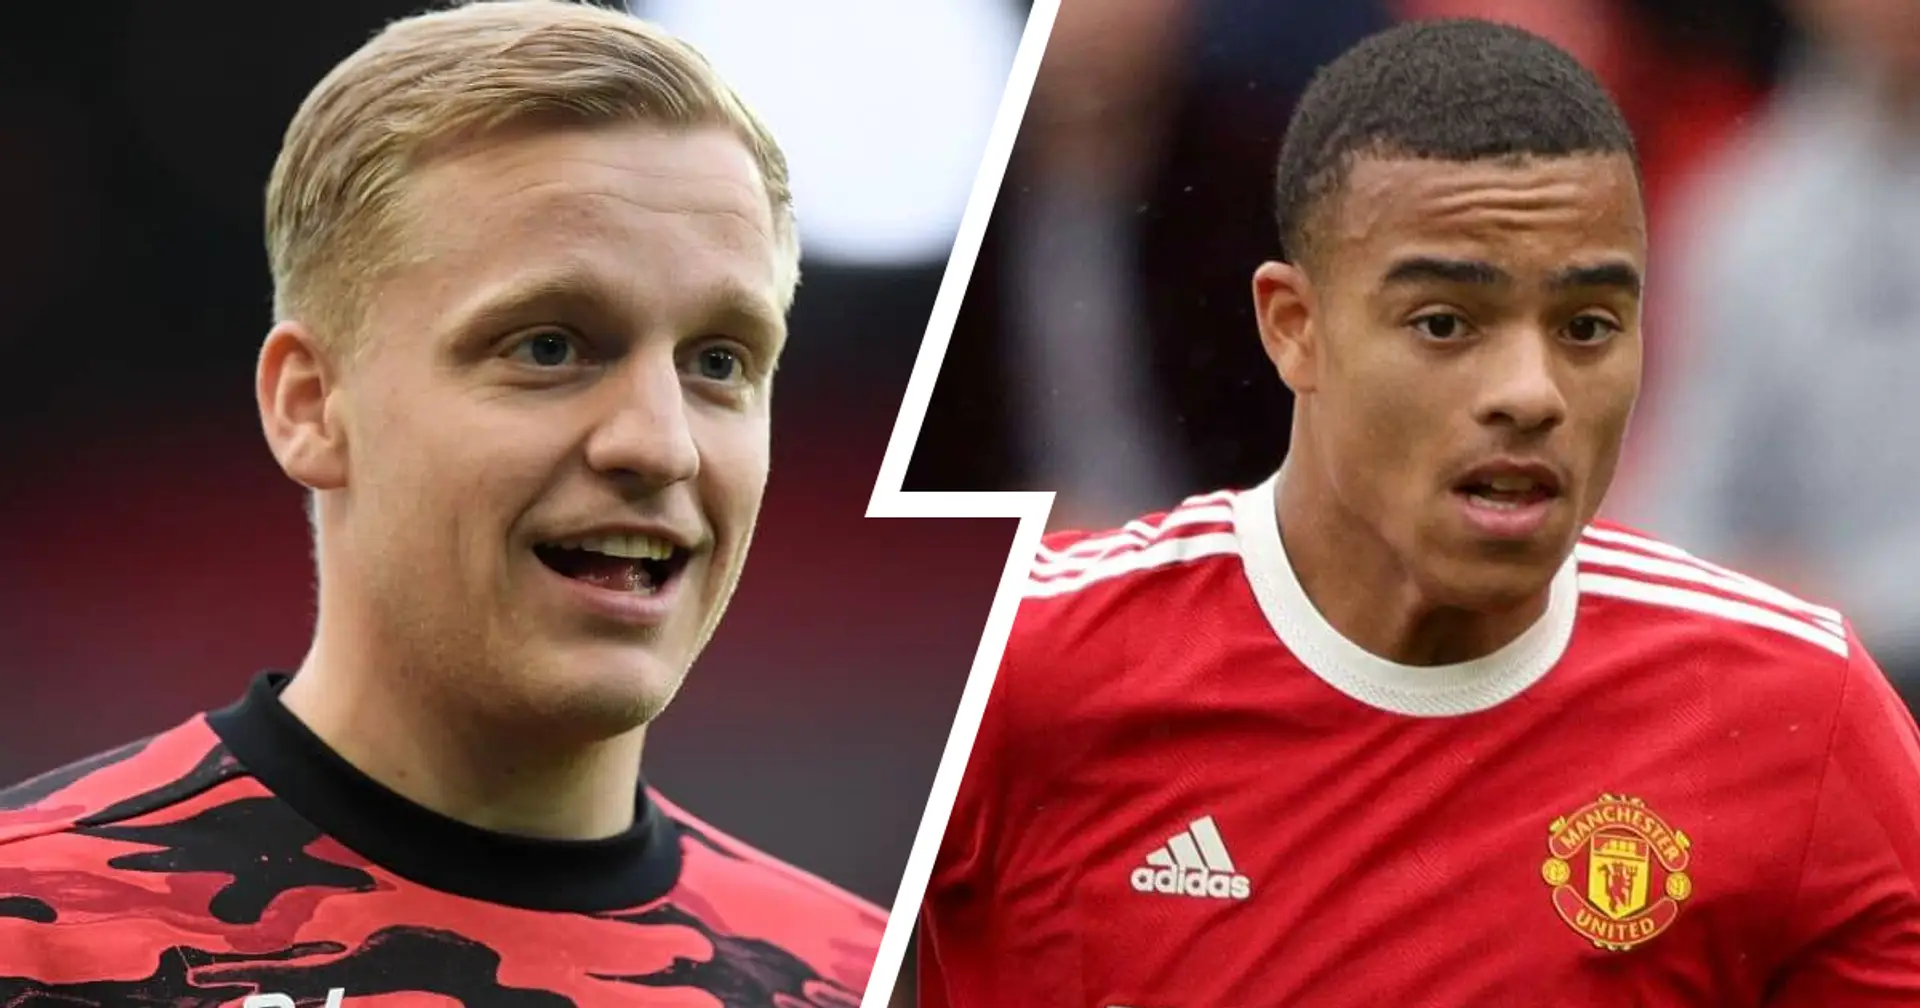 Donny van de Beek and Mason Greenwood to feature in Man United's closed-doors friendly vs Stoke City